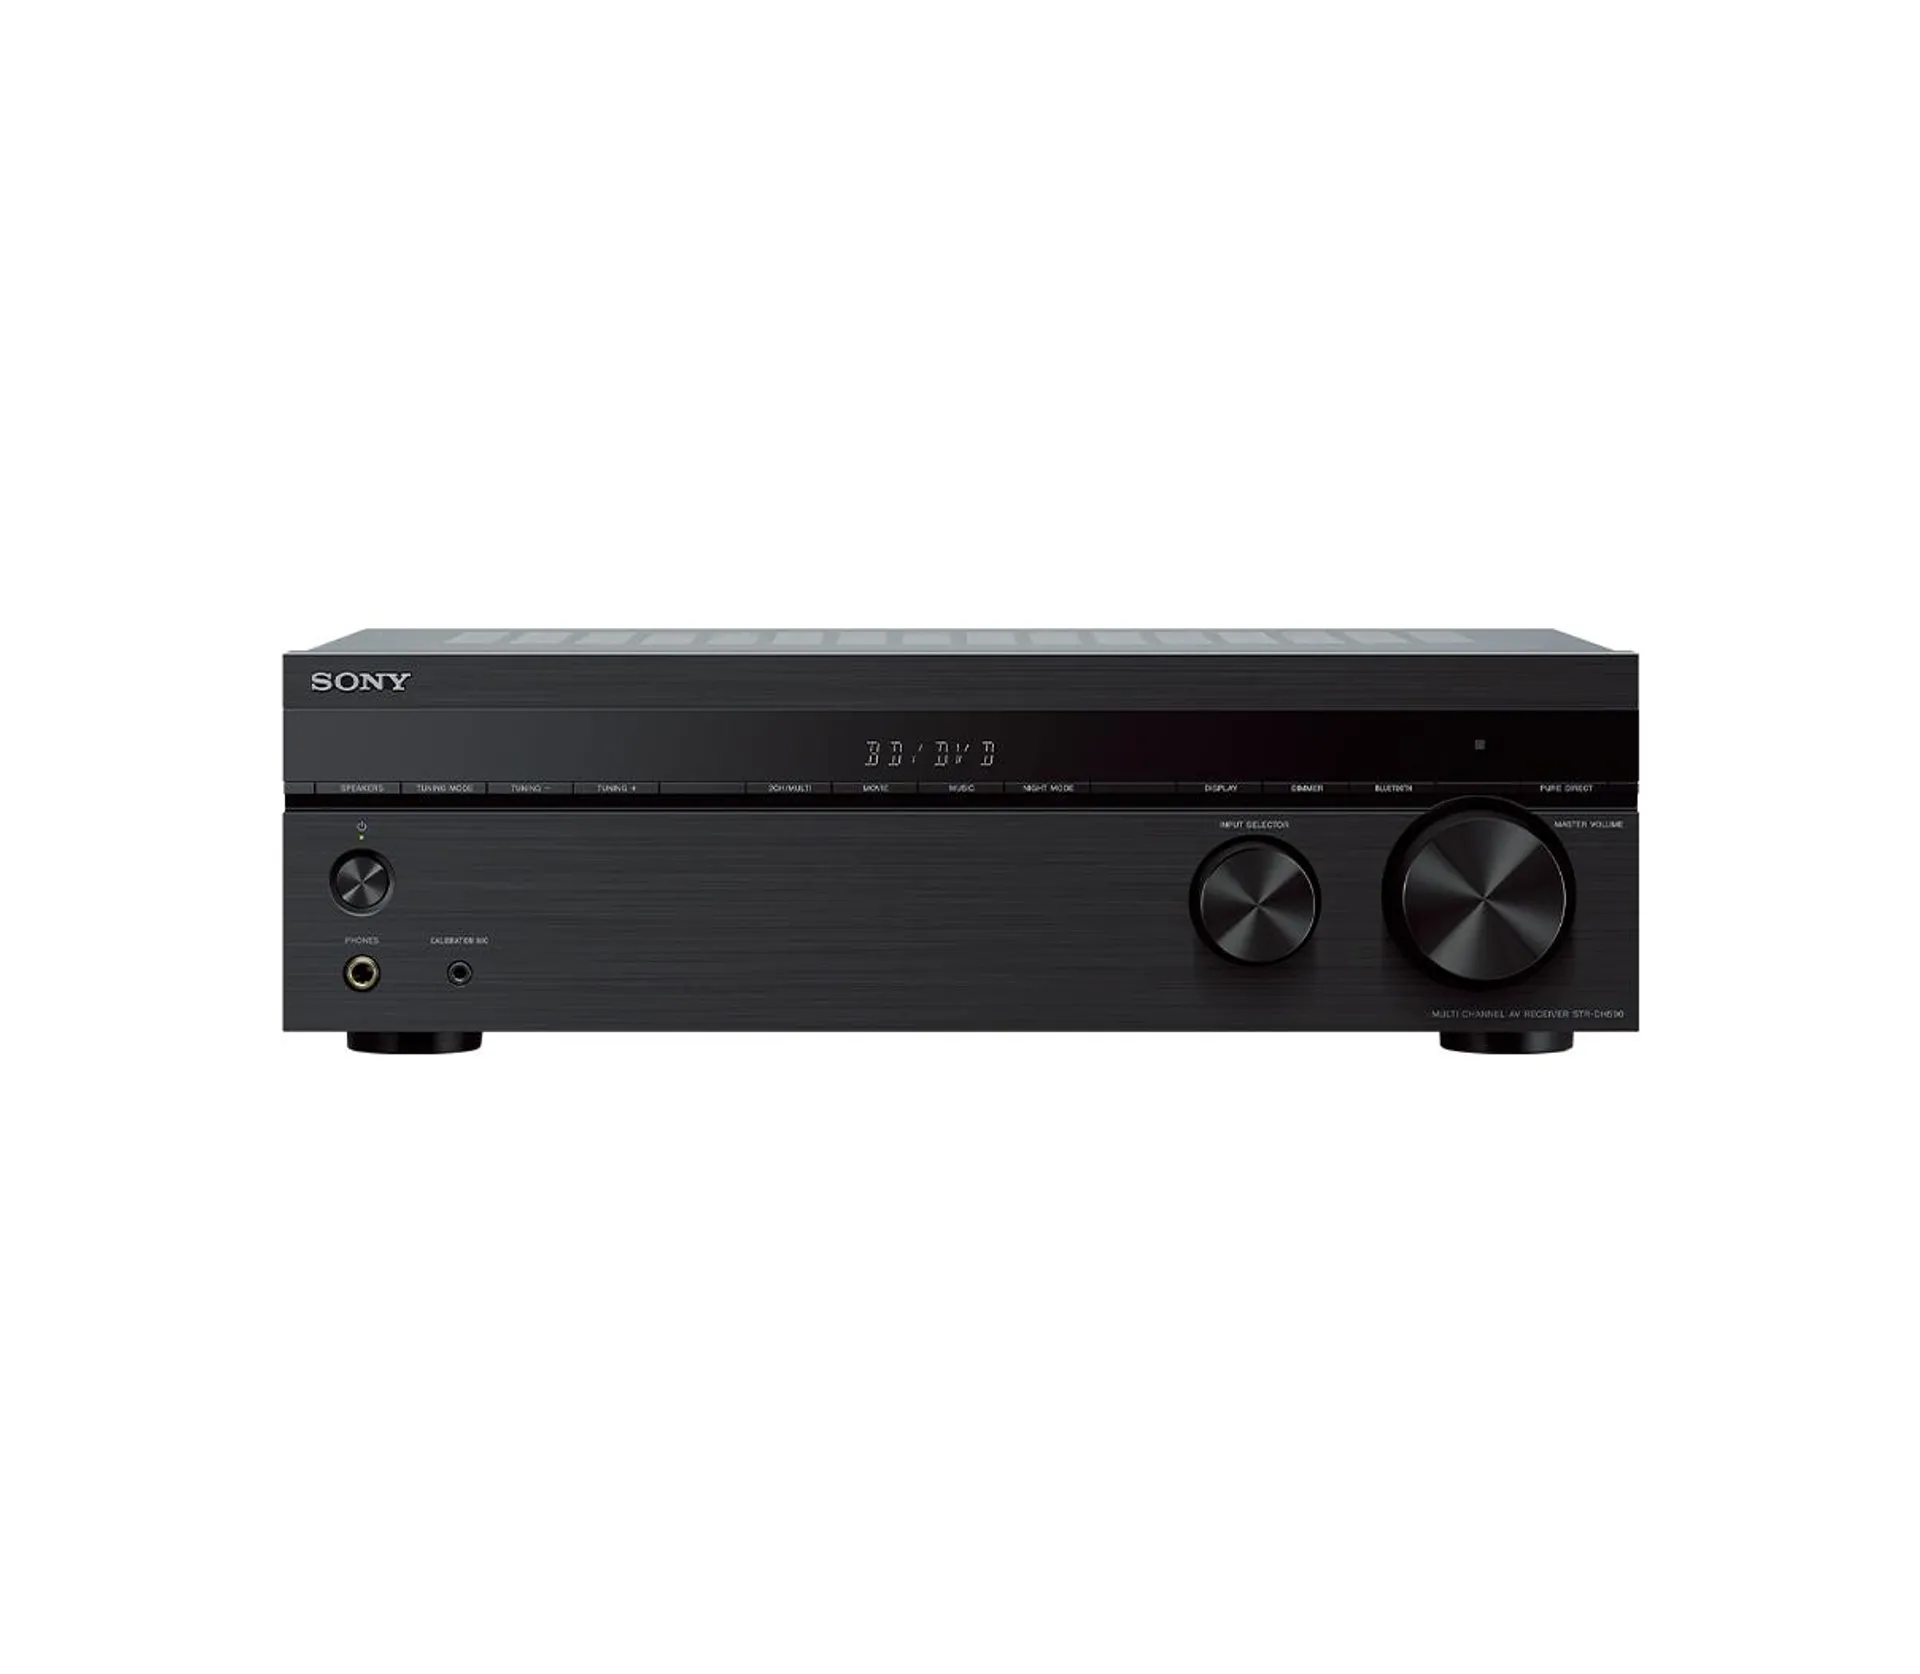 STR-DH590 5.2ch Home Theater AV Receiver with Bluetooth